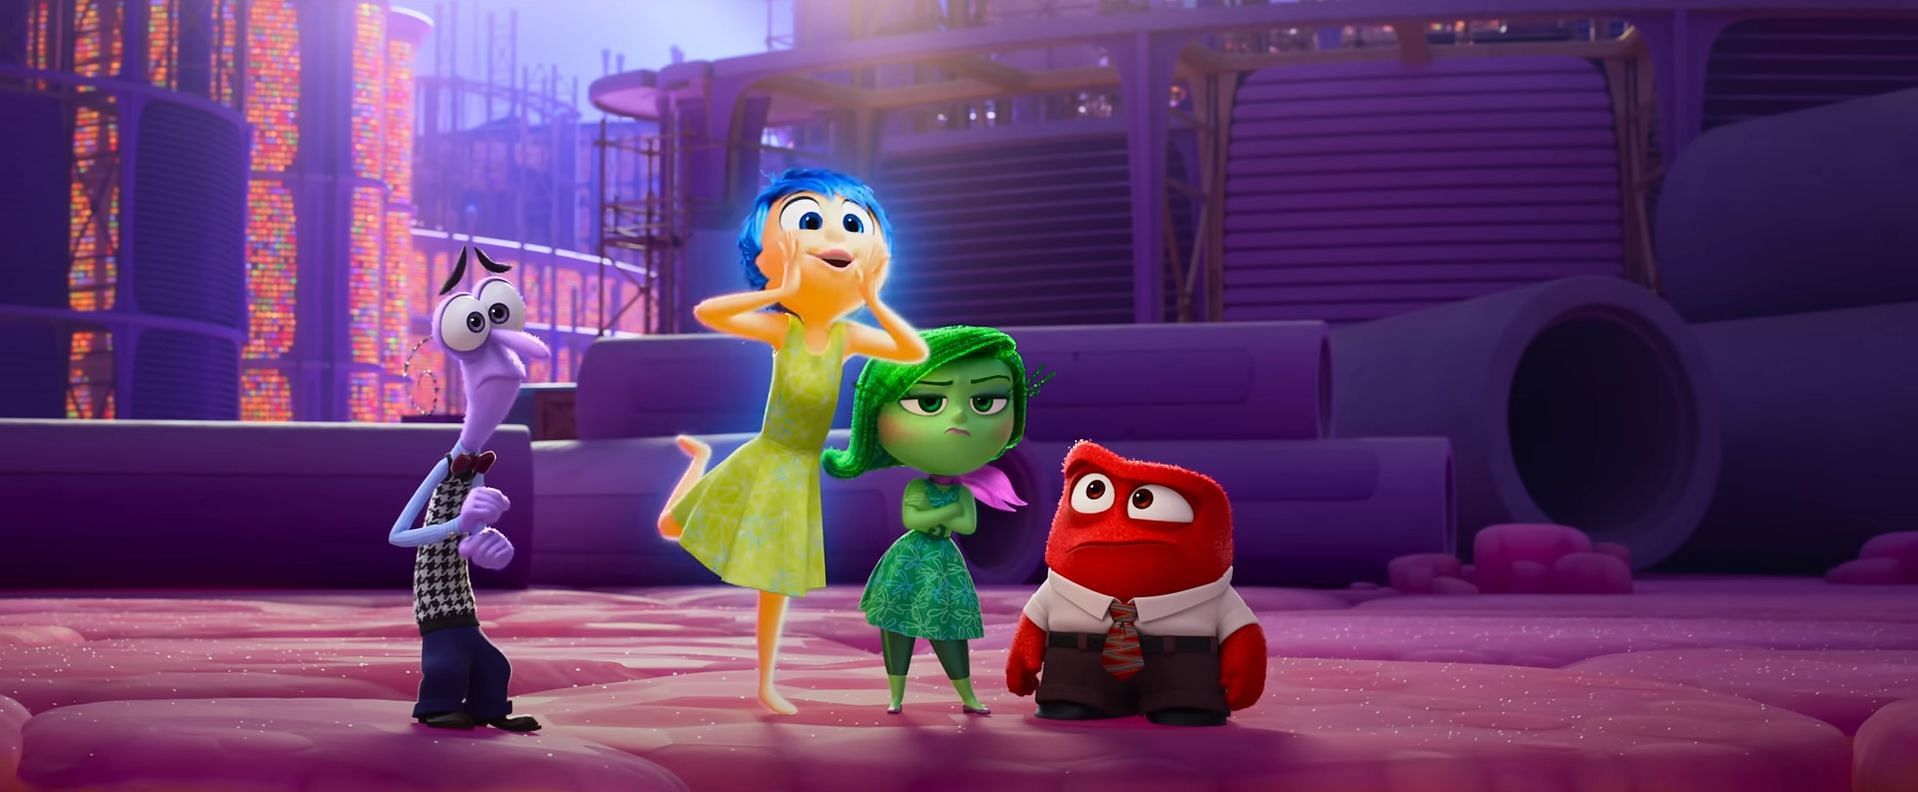 A still from the film Inside Out 2 (Image by Pixar)